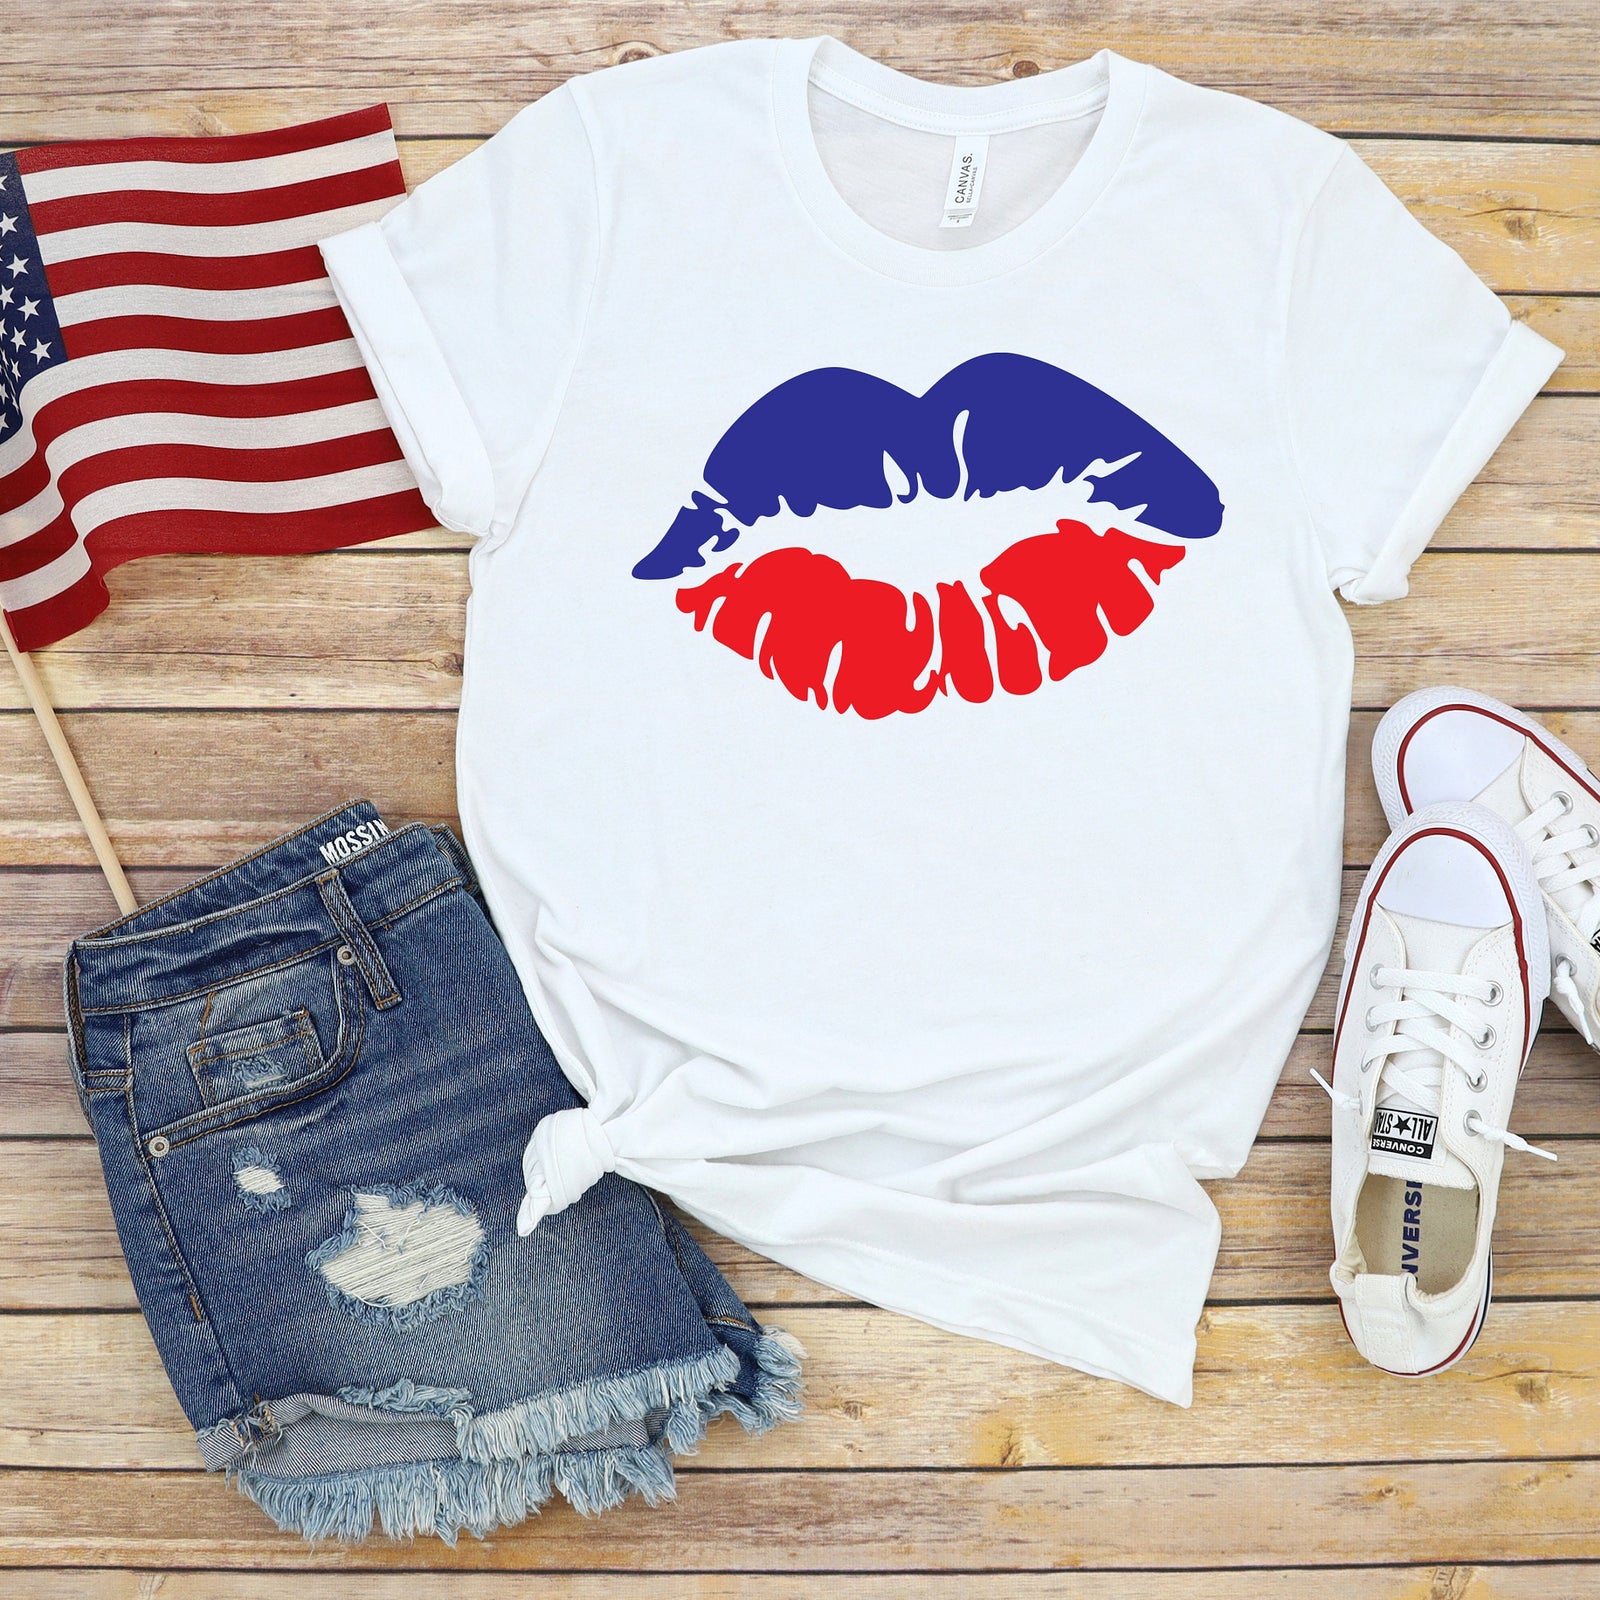 All American Lips- Fourth of July Adult T Shirt - Independence Day - Memorial - Red White and Blue